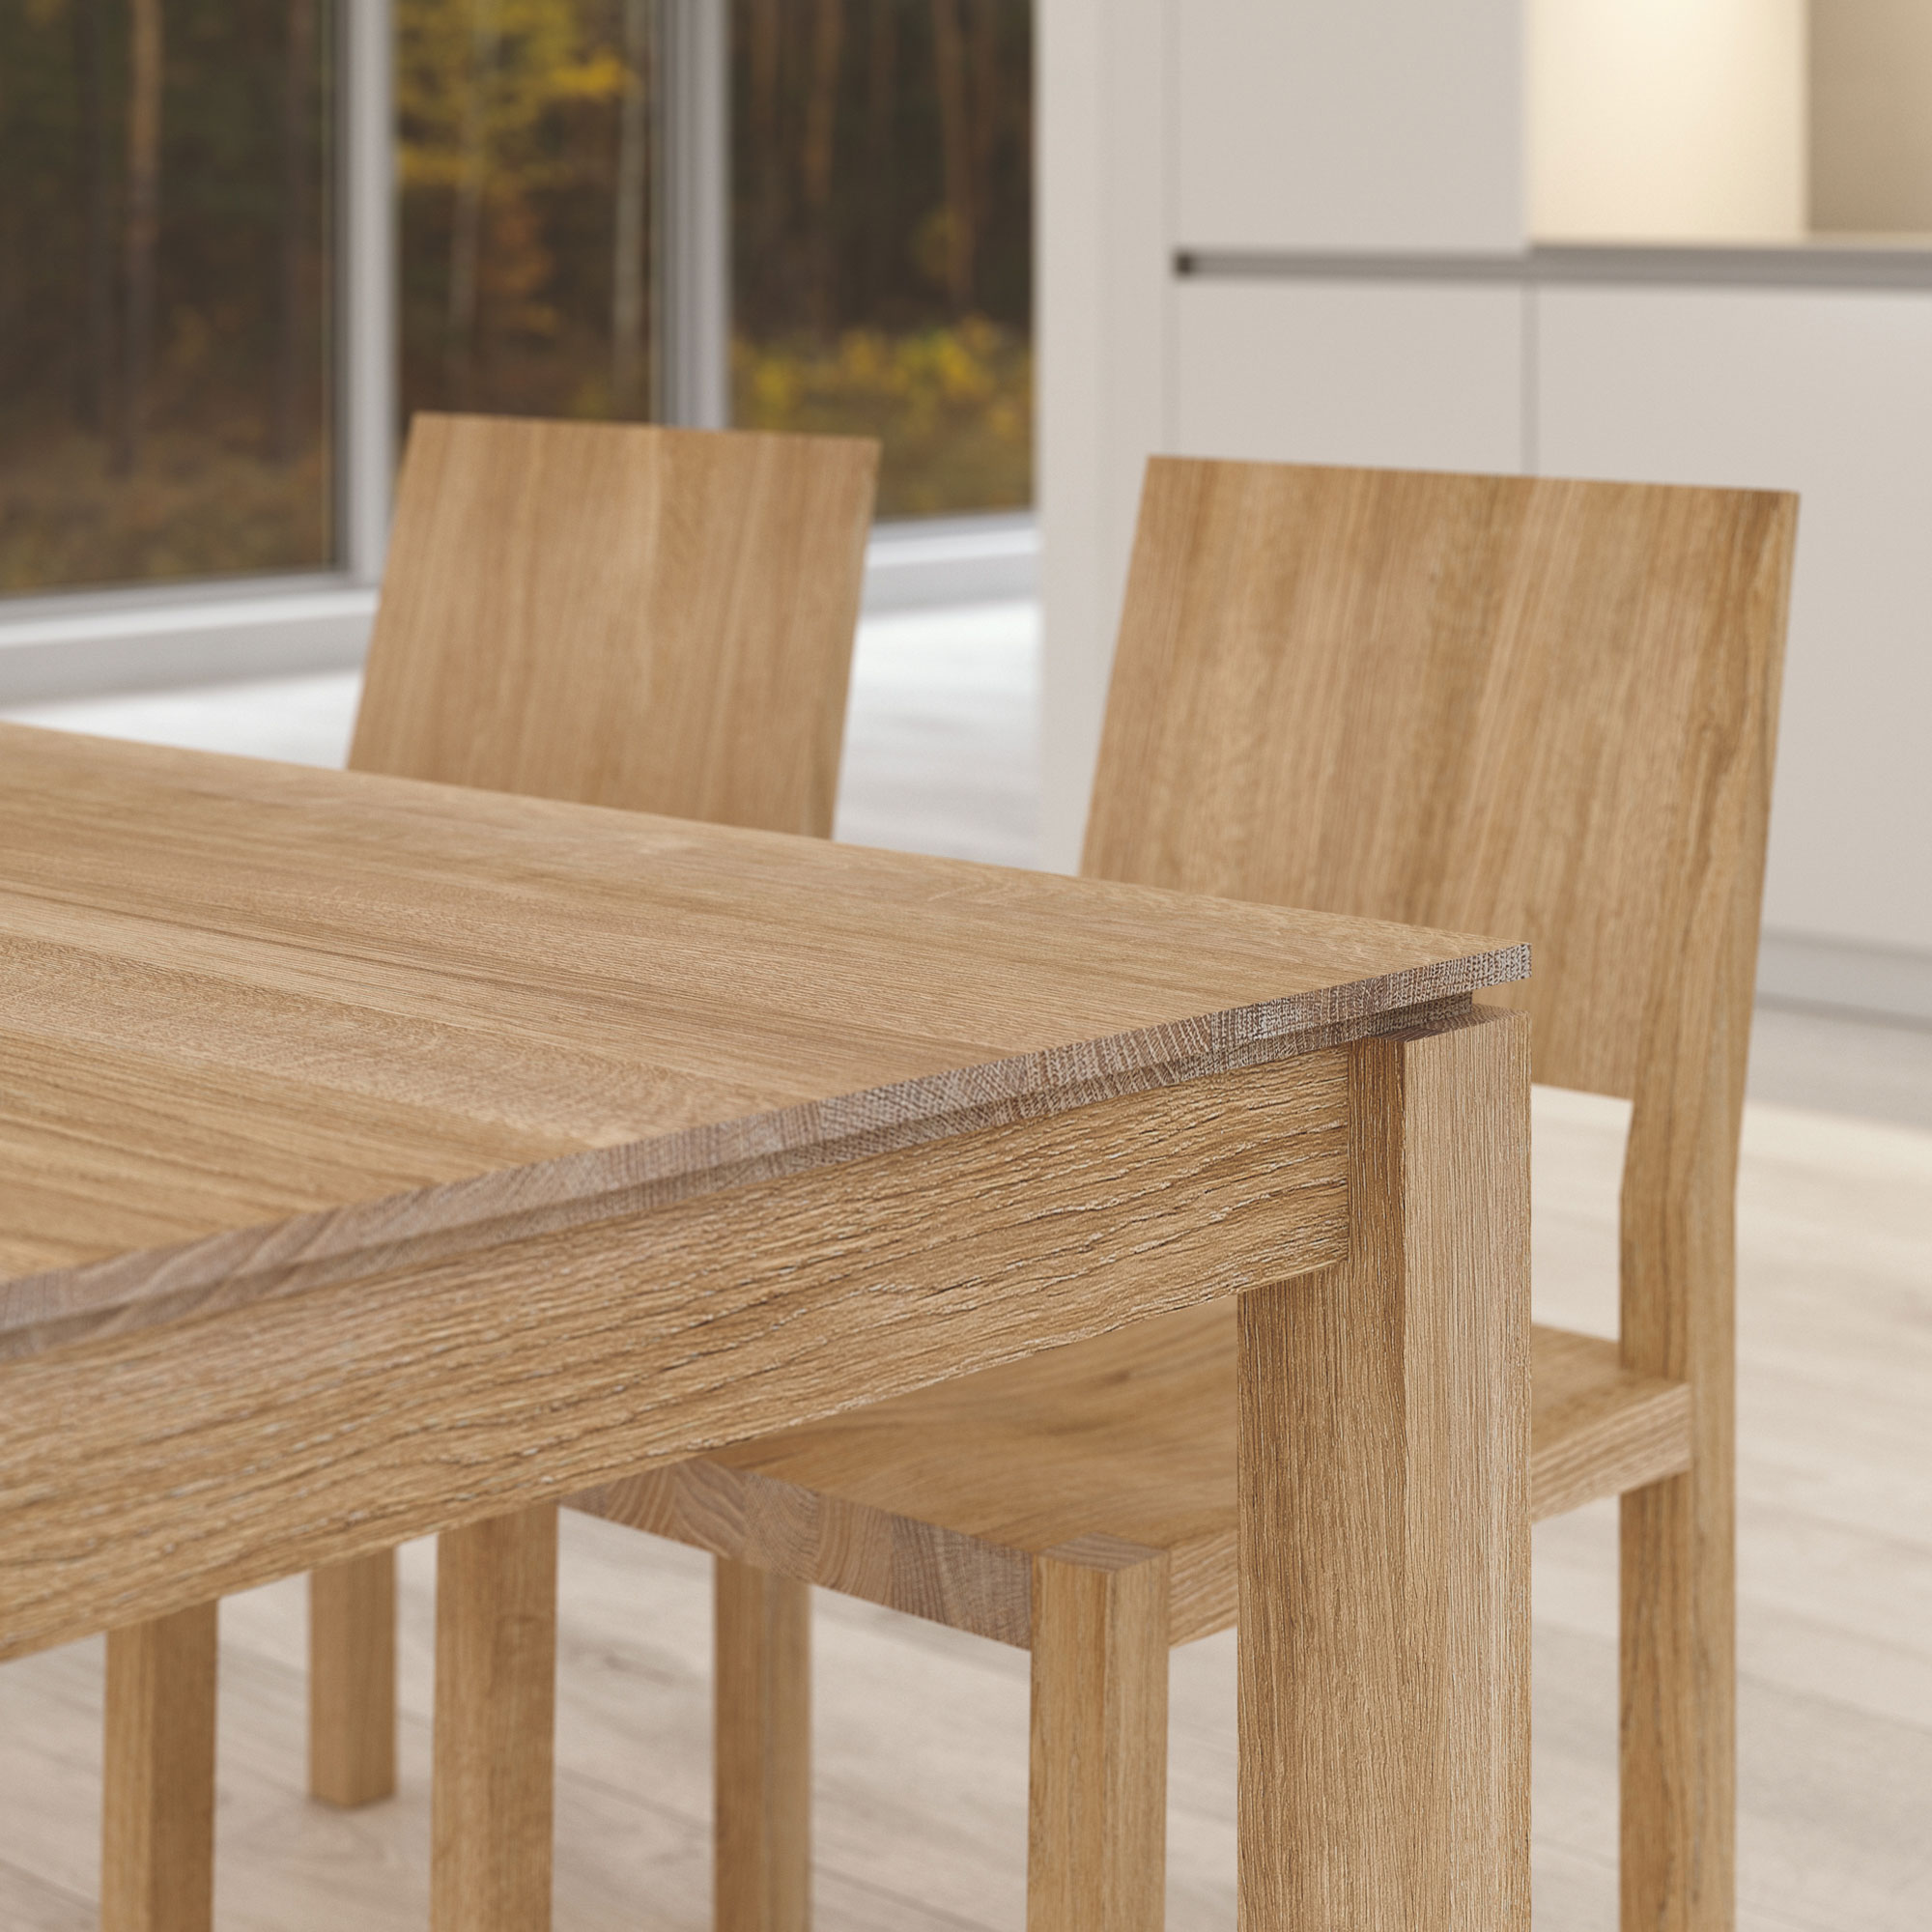 Extending Dining Table CONVERTO BUTTERFLY Final1 custom made in solid wood by vitamin design